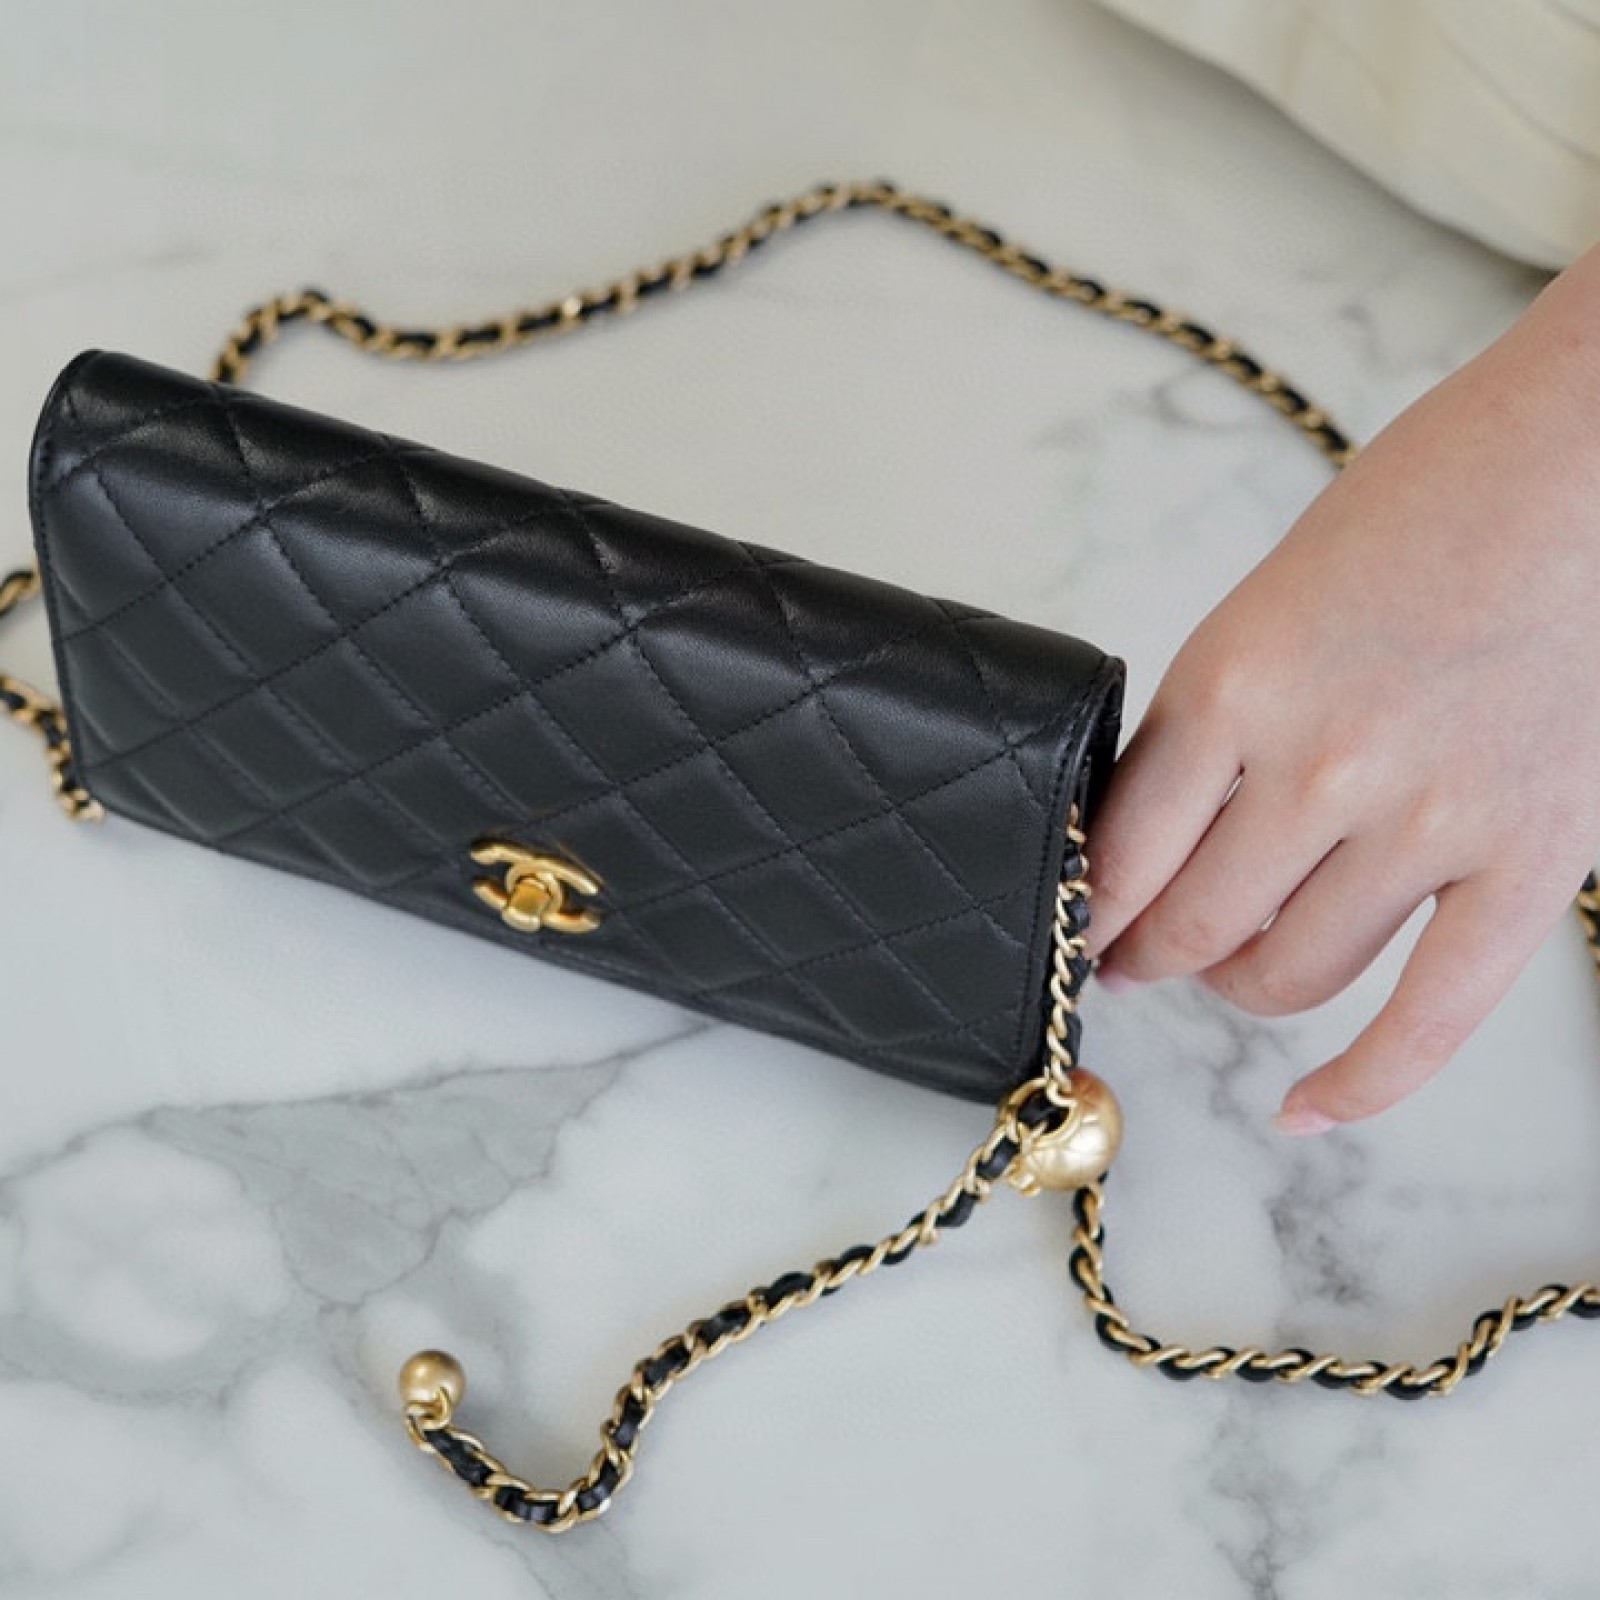 CHANEL PEARL CRUSH WALLET ON CHAIN 